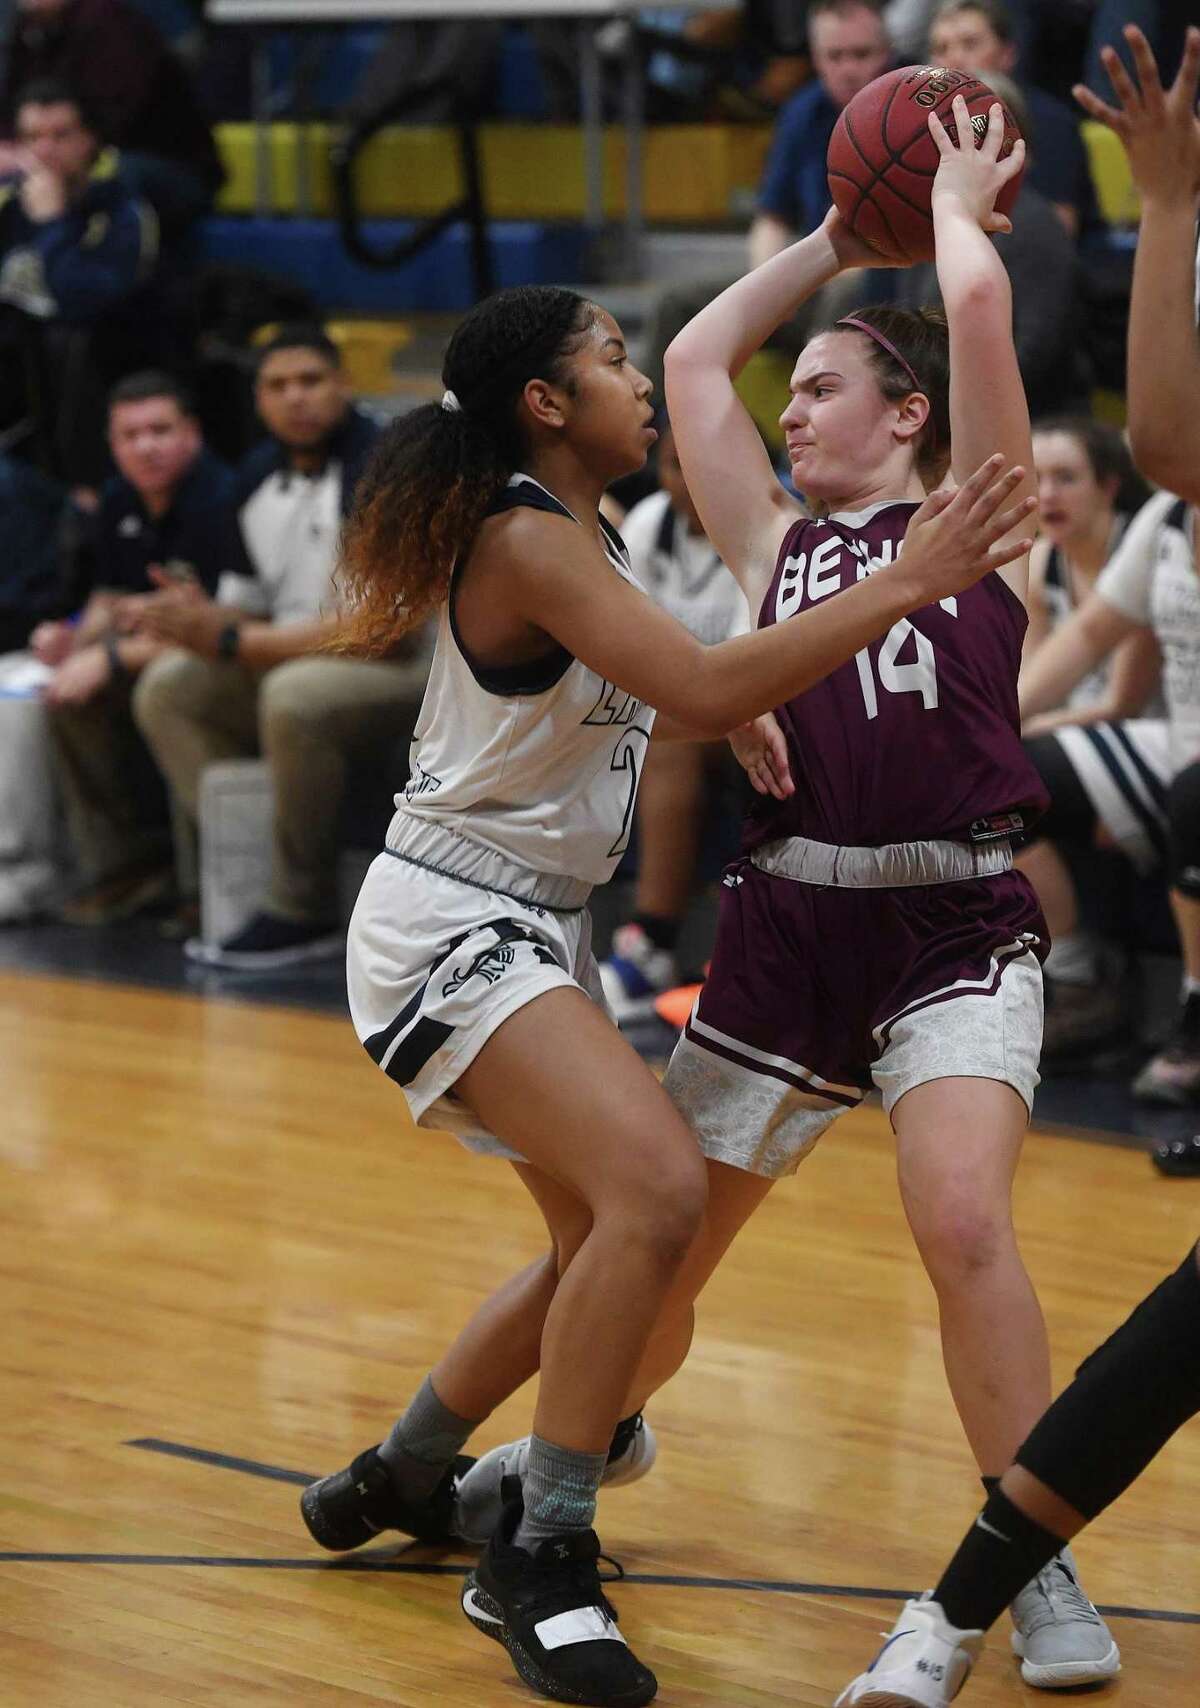 Notre Dame of Fairfield's Aizhanique Mayo pressures Bethel ball handler Brooke Lacey in the first half of their matchup in the SWC girls basketball tournament at Notre Dame High School in Fairfield, Conn. on Monday, February 18, 2019.